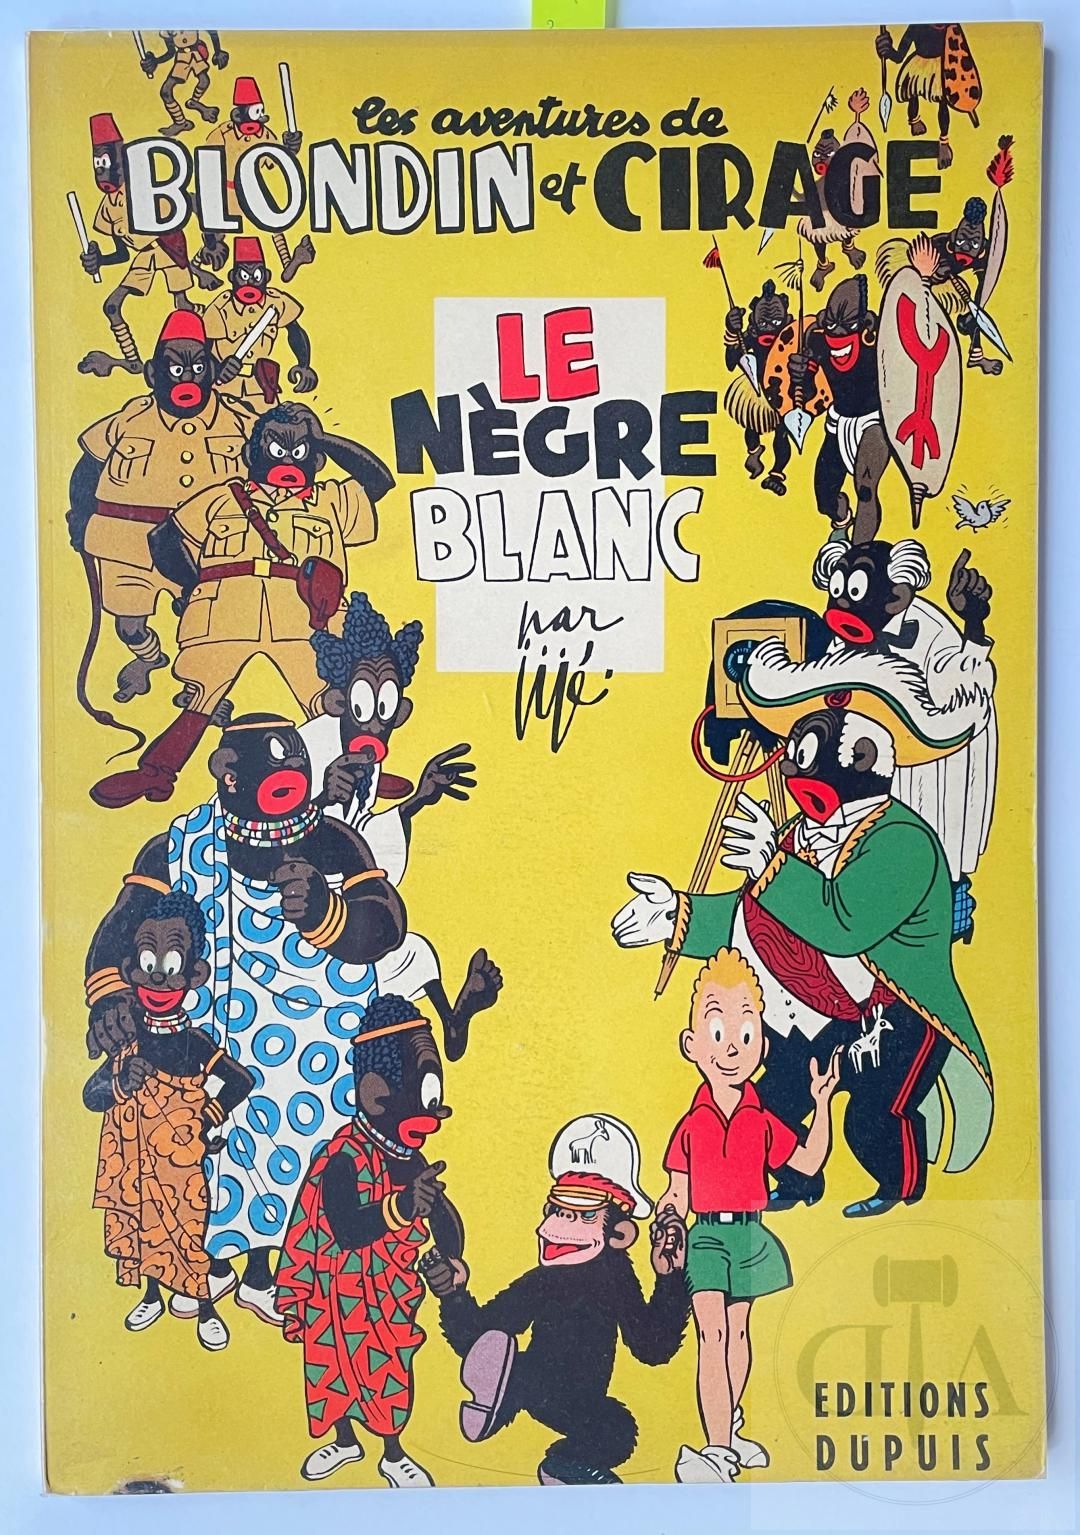 Null Gijé/Blondin and waxing. Album T6 "Le nègre blanc" EO of 1952. Rare. Flats:&hellip;